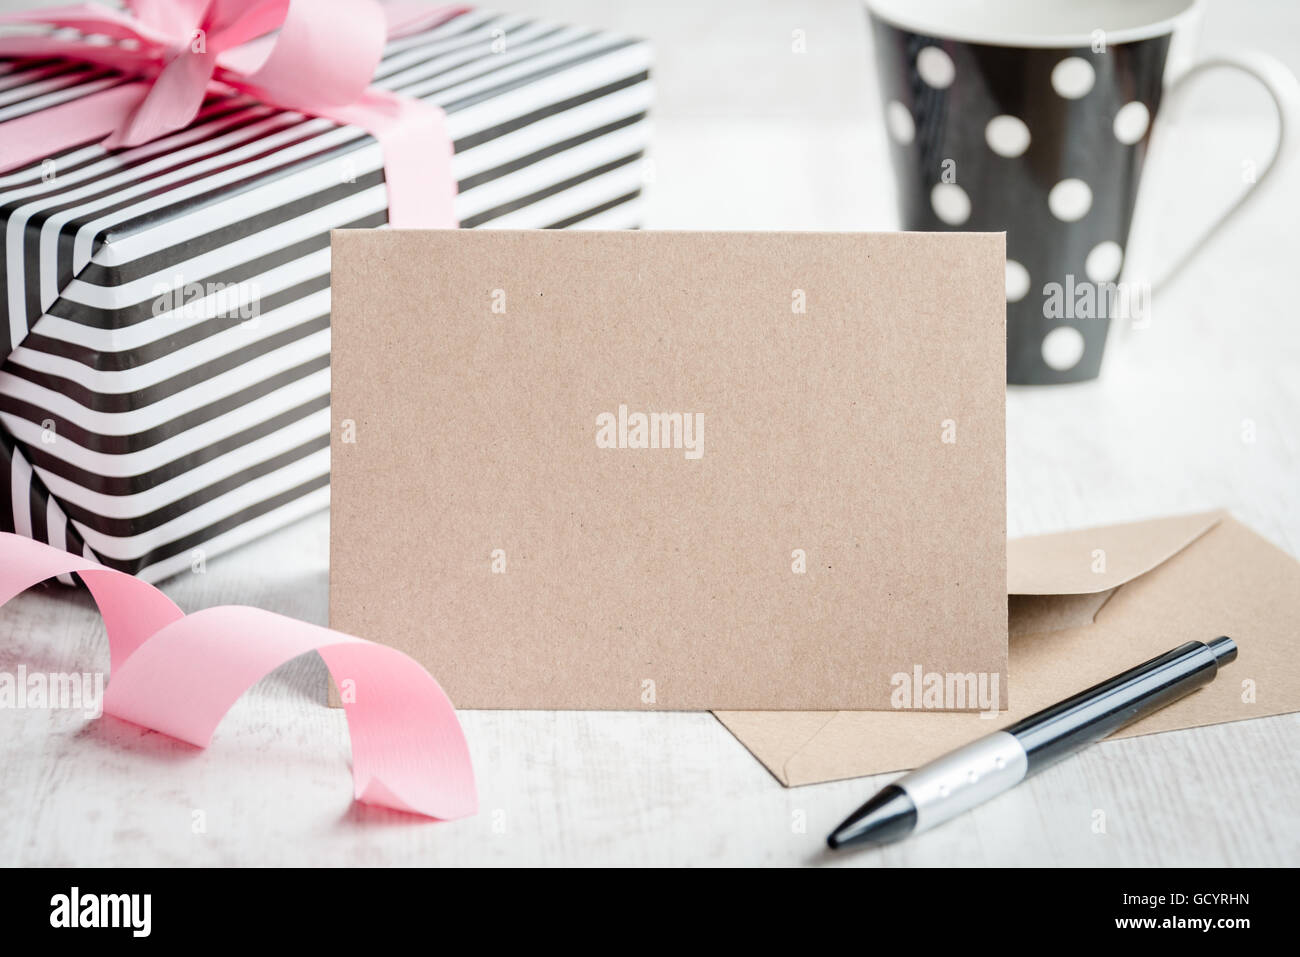 Empty greeting kraft card. Wrapped gift and coffee cup in the background. Stock Photo